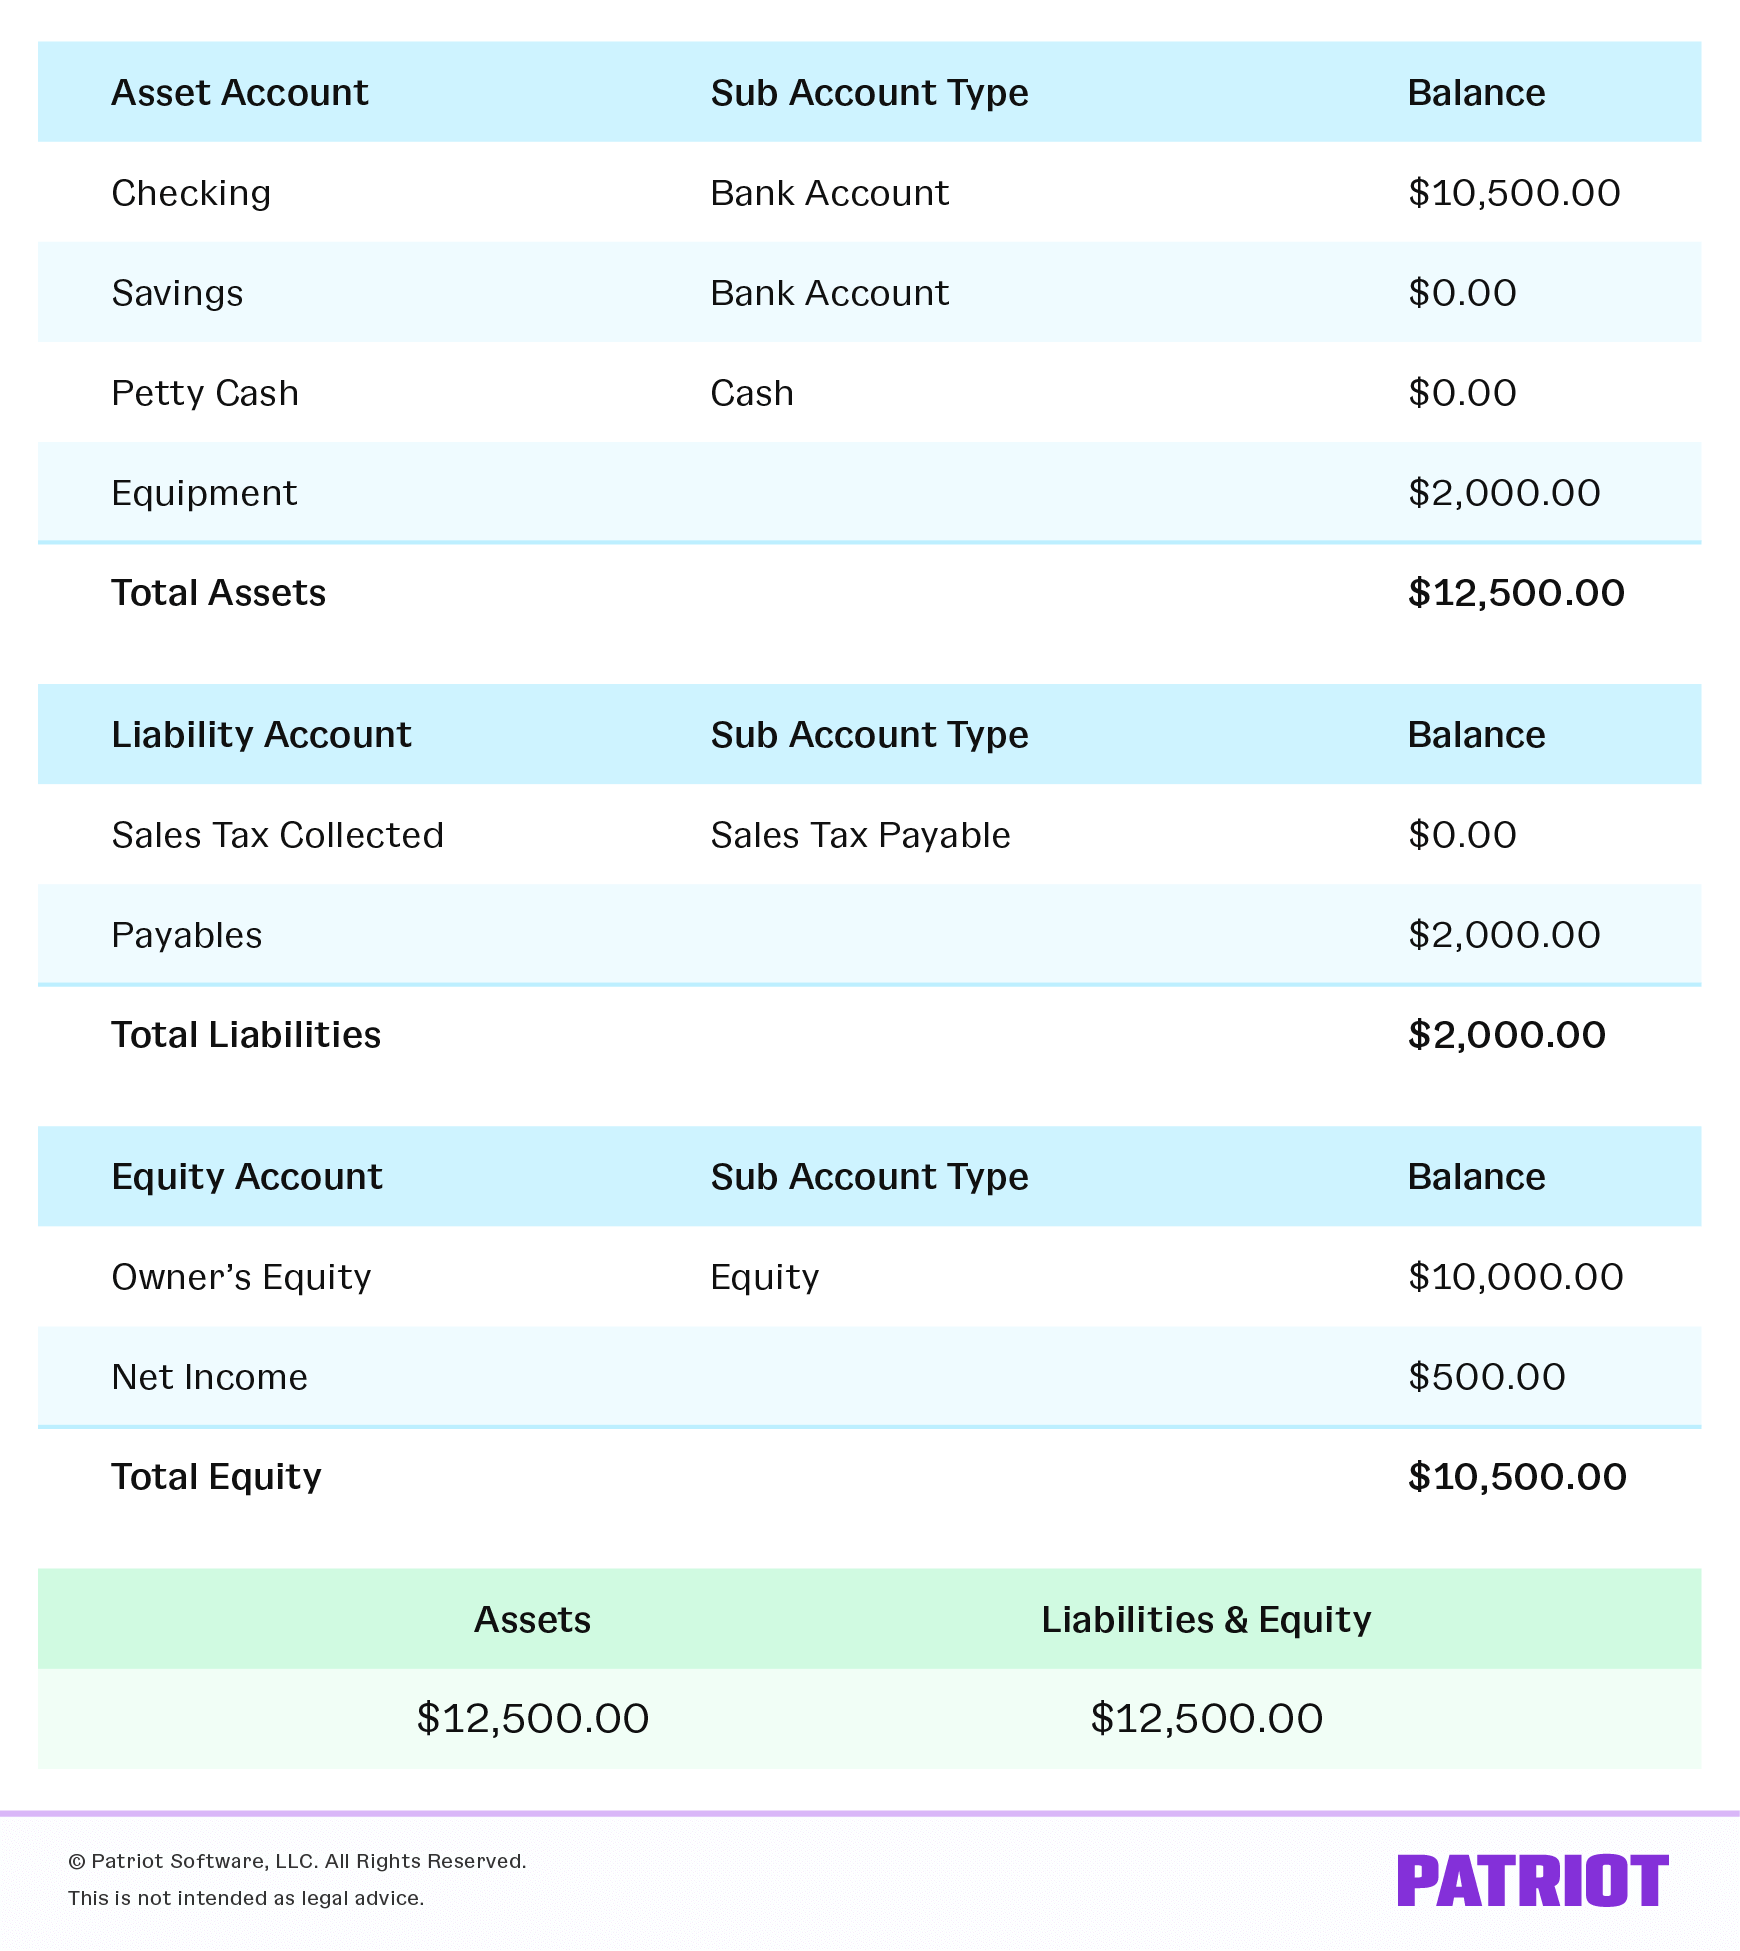 Sample balance sheet showing assets equaling liabilities and equity.